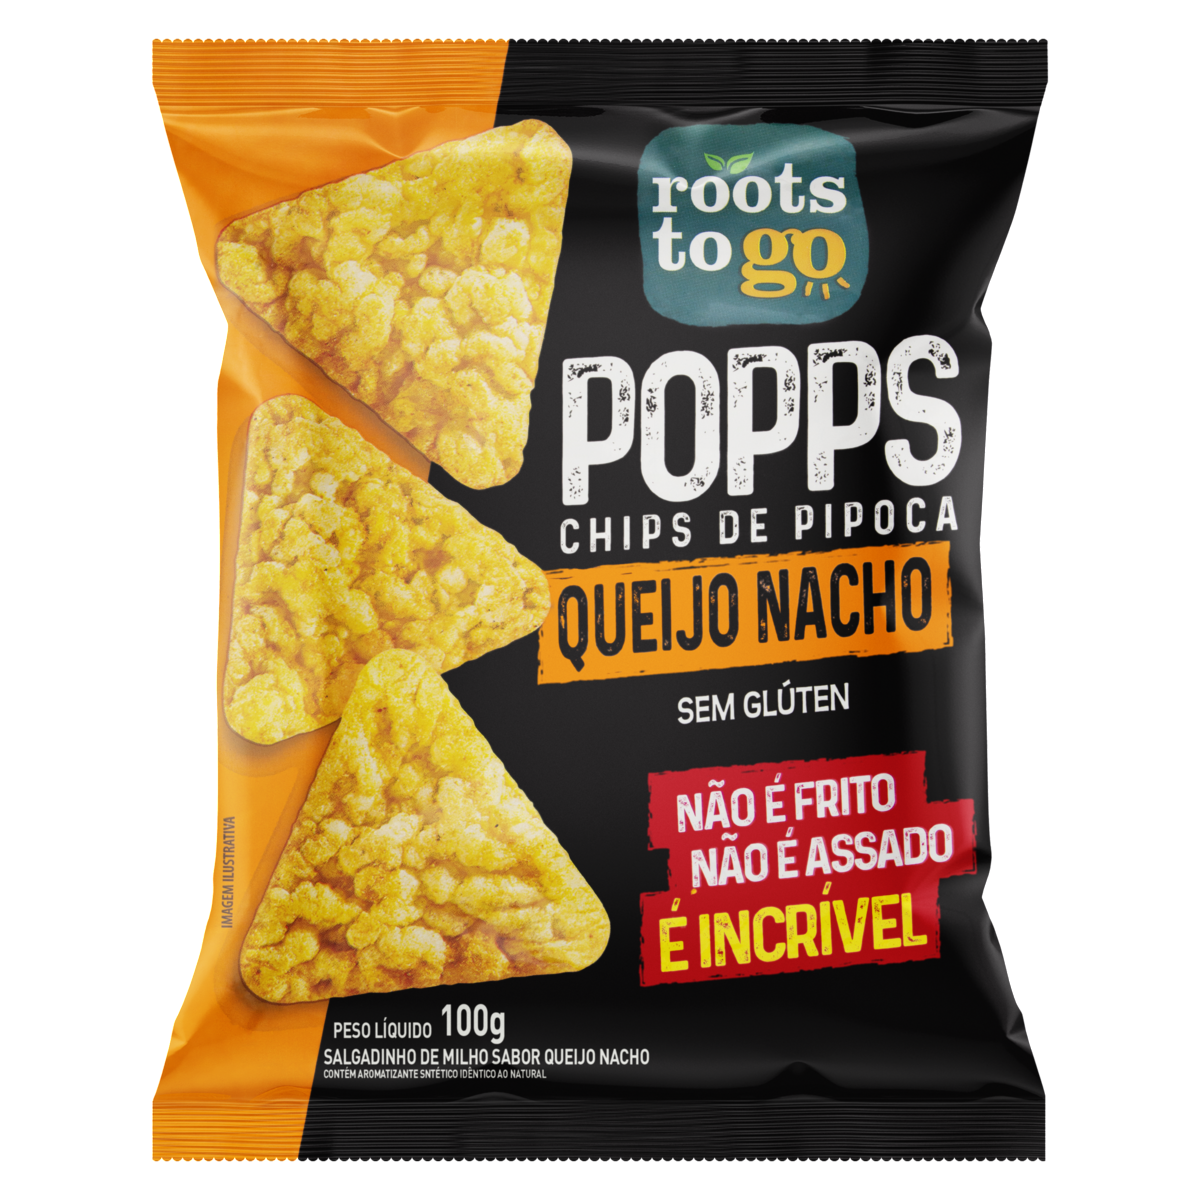 7898557010299 - CHIPS DE PIPOCA QUEIJO NACHO ROOTS TO GO POPPS PACOTE 100G